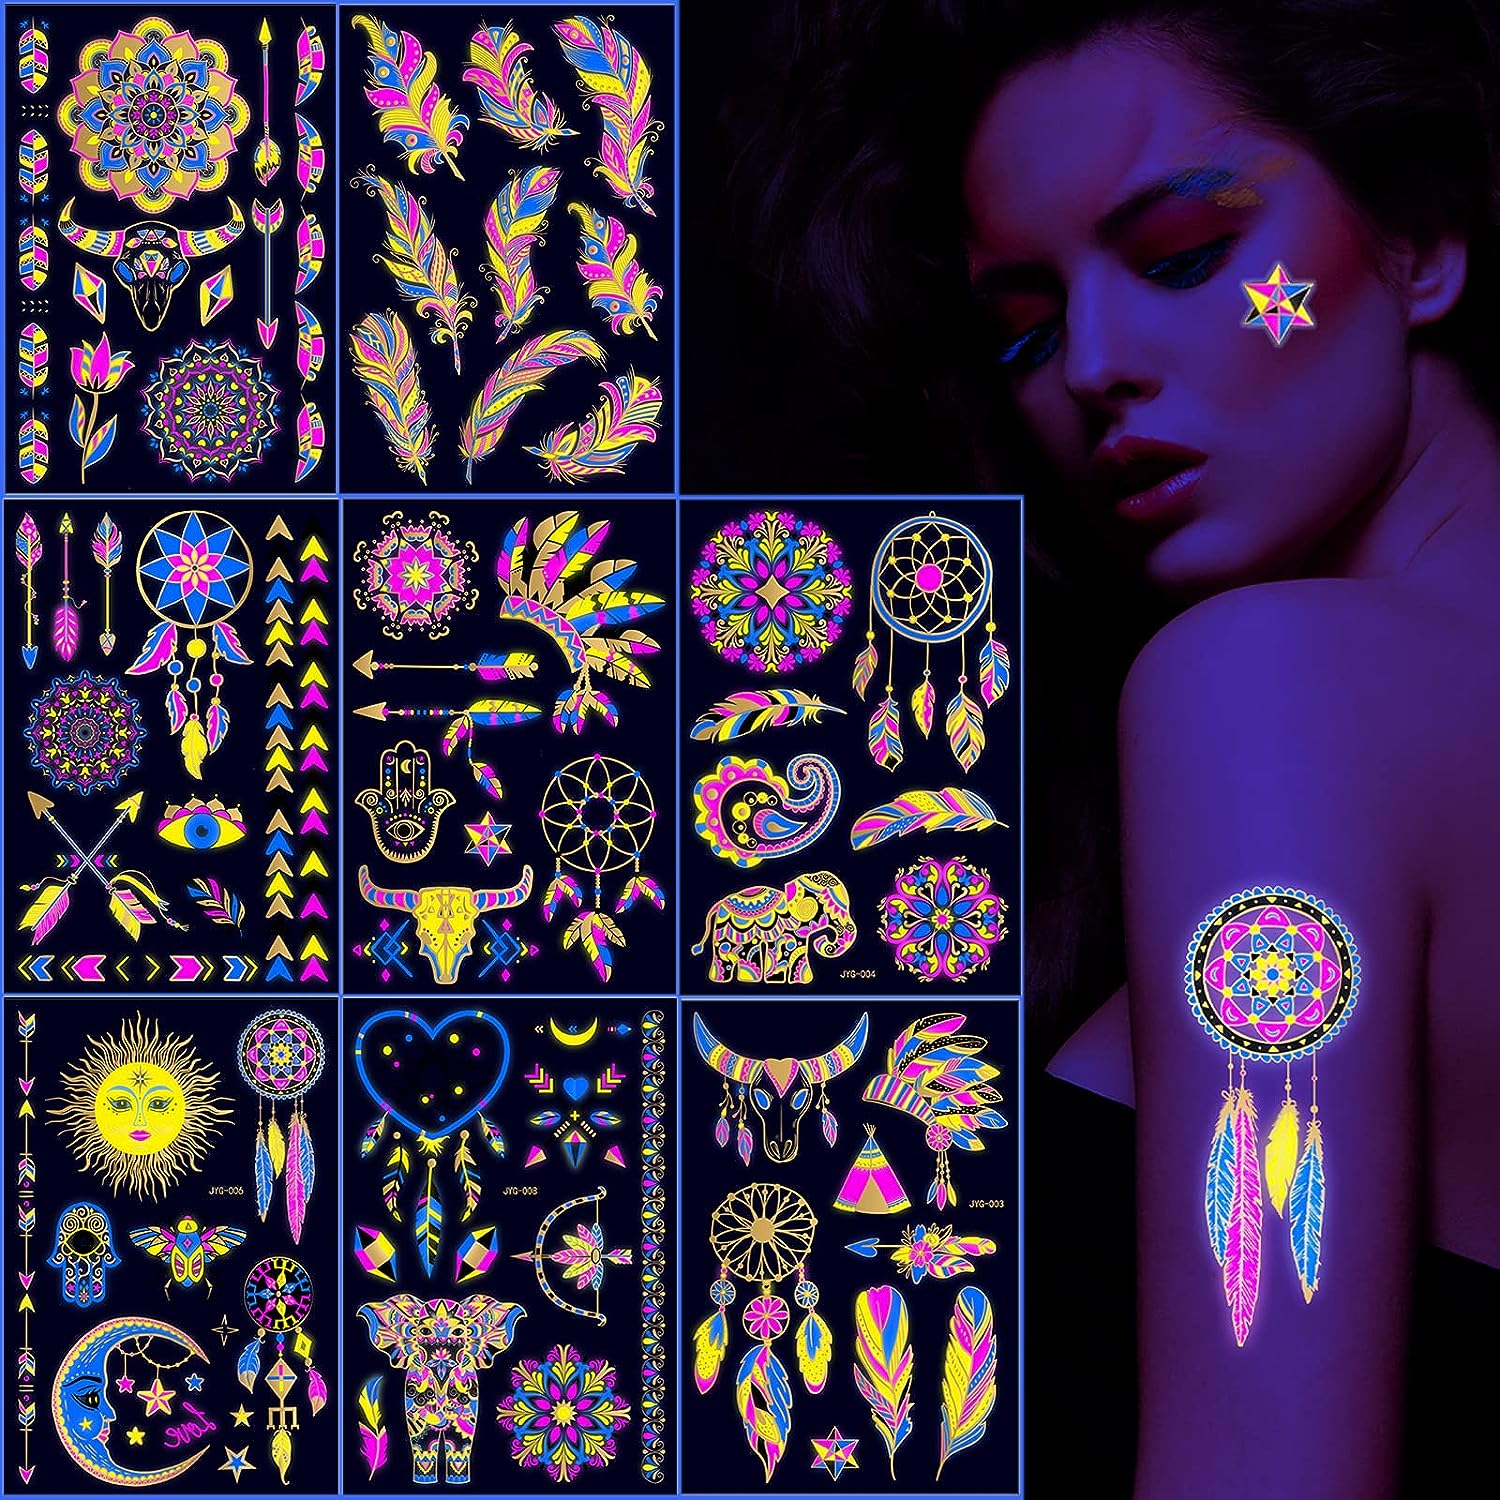 Neon Metallic Gold Temporary Tattoos Glow In The Dark UV Neon Tattoos Stickers 80 Glitter Styles Mandalas Feather Elephants Horns Party Decoration for Adults Kids